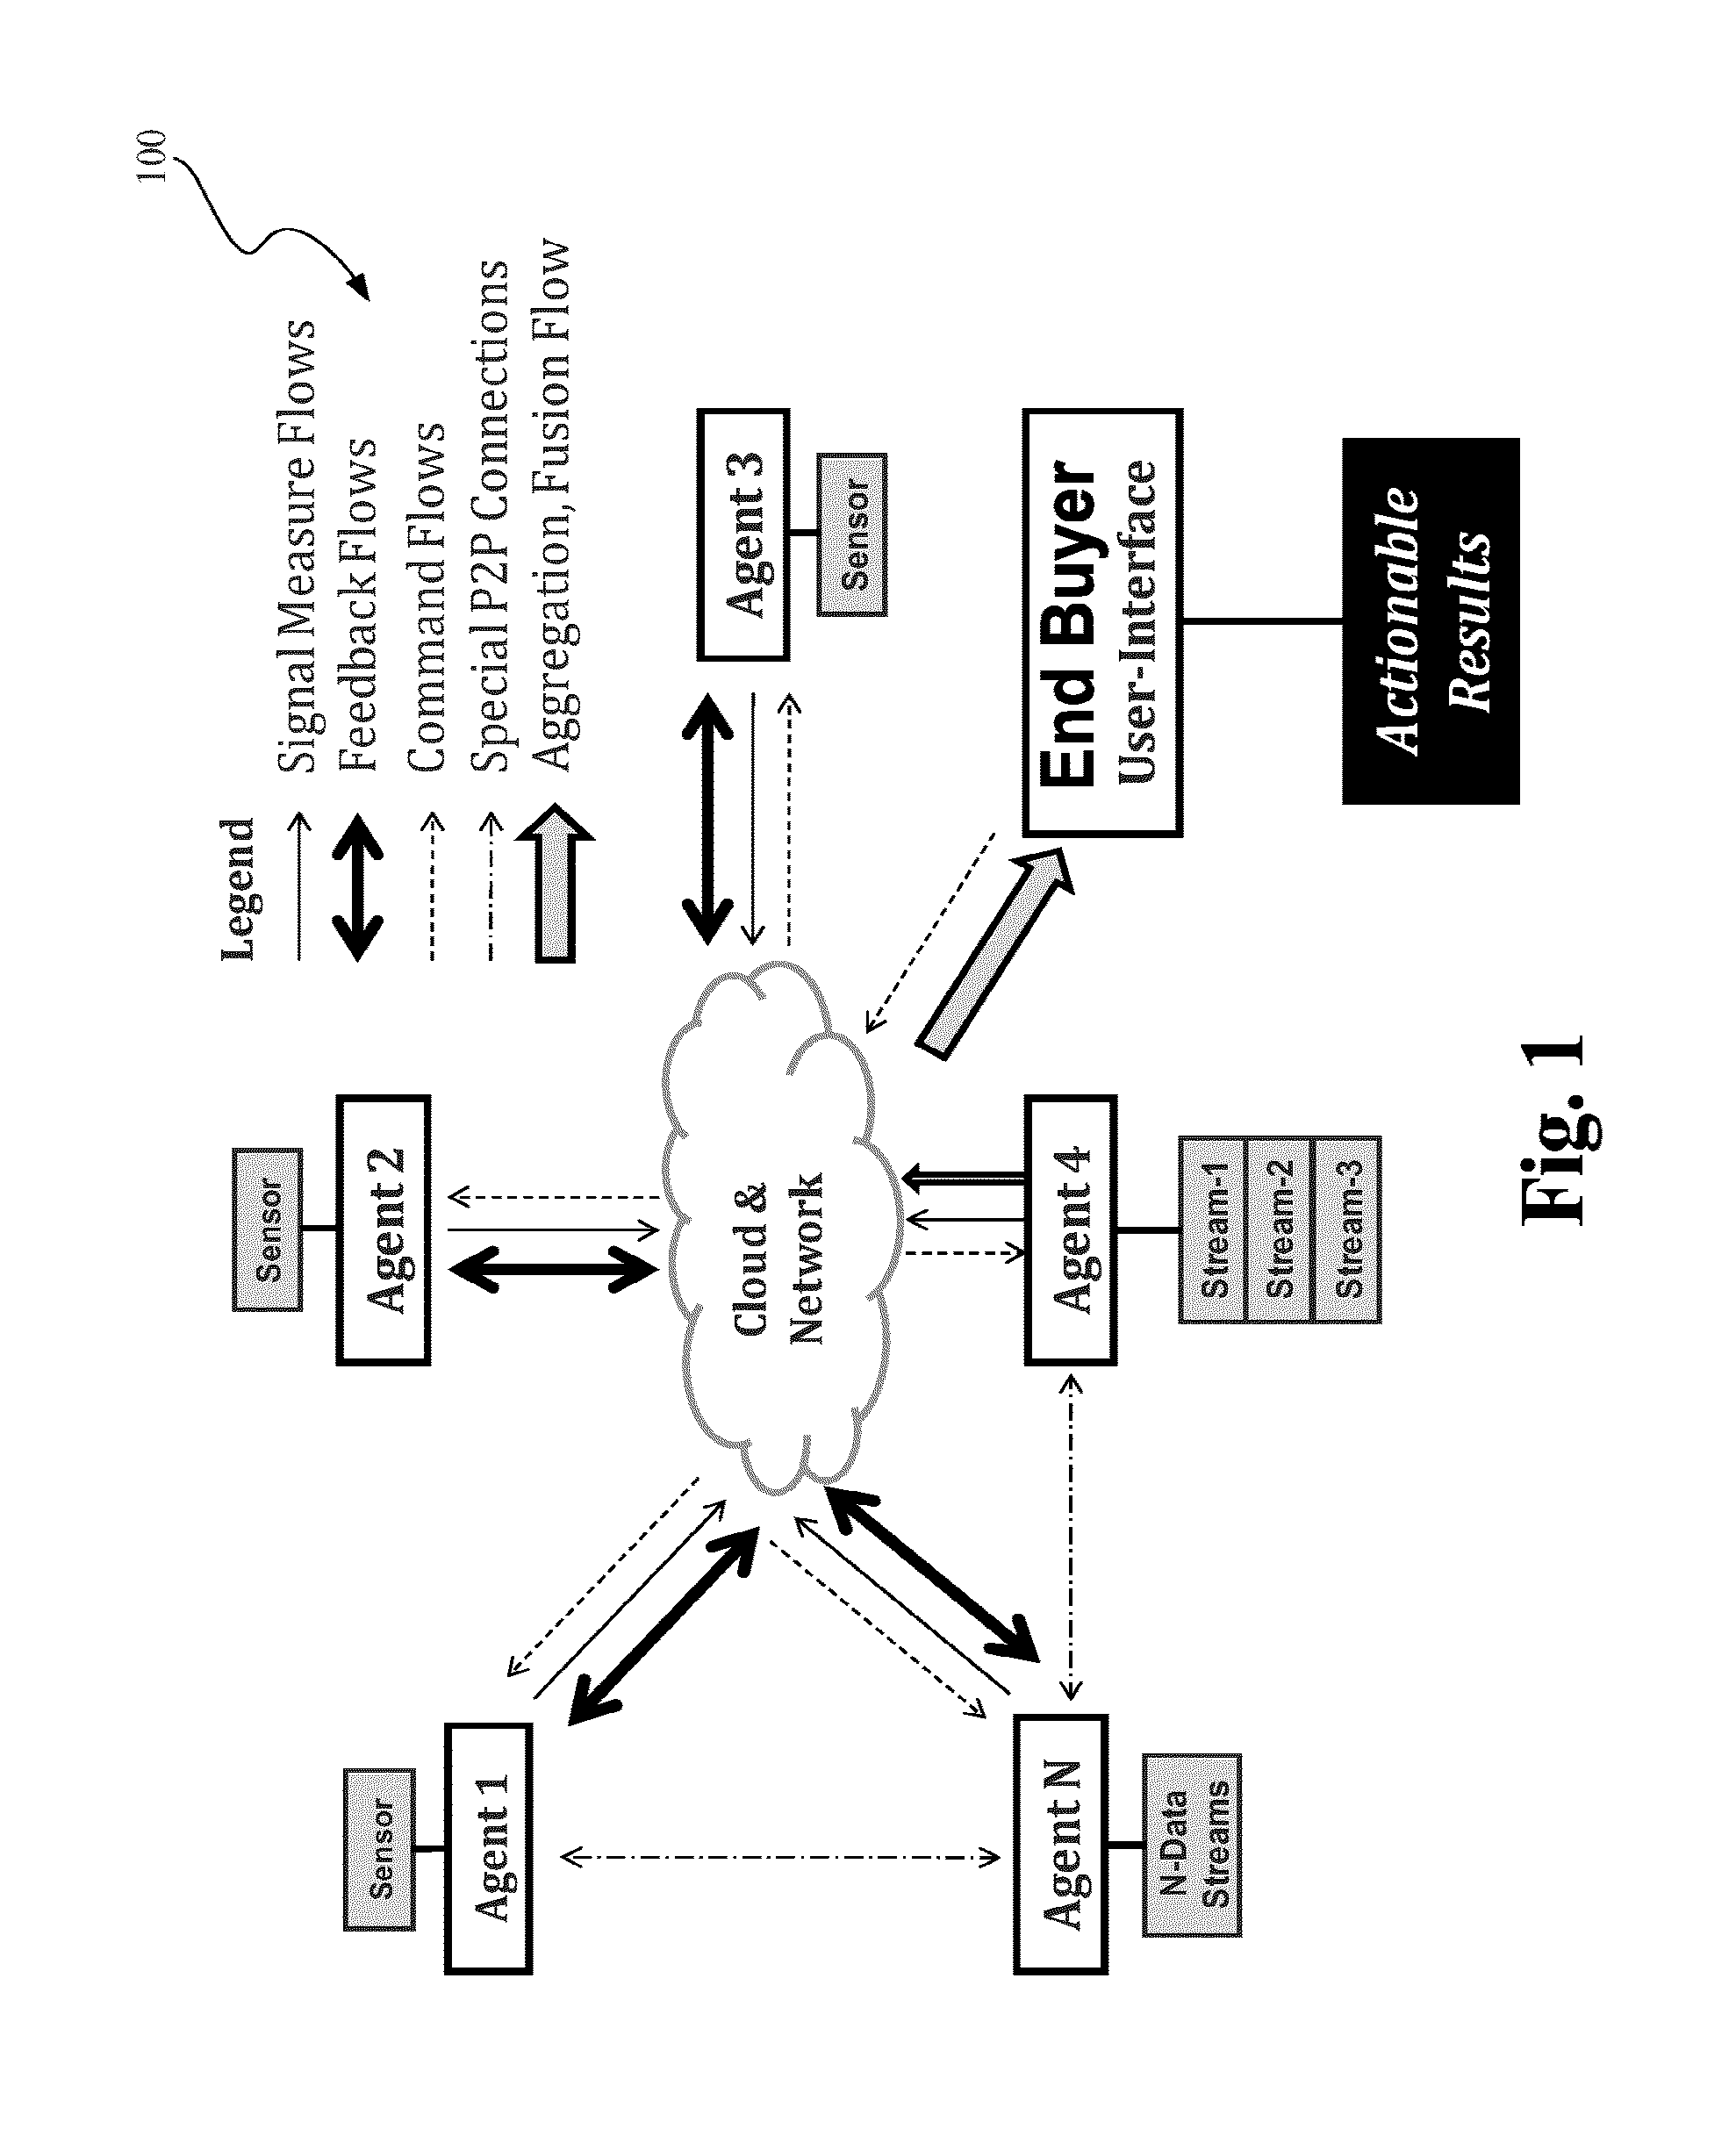 Apparatus and method for high performance data analysis